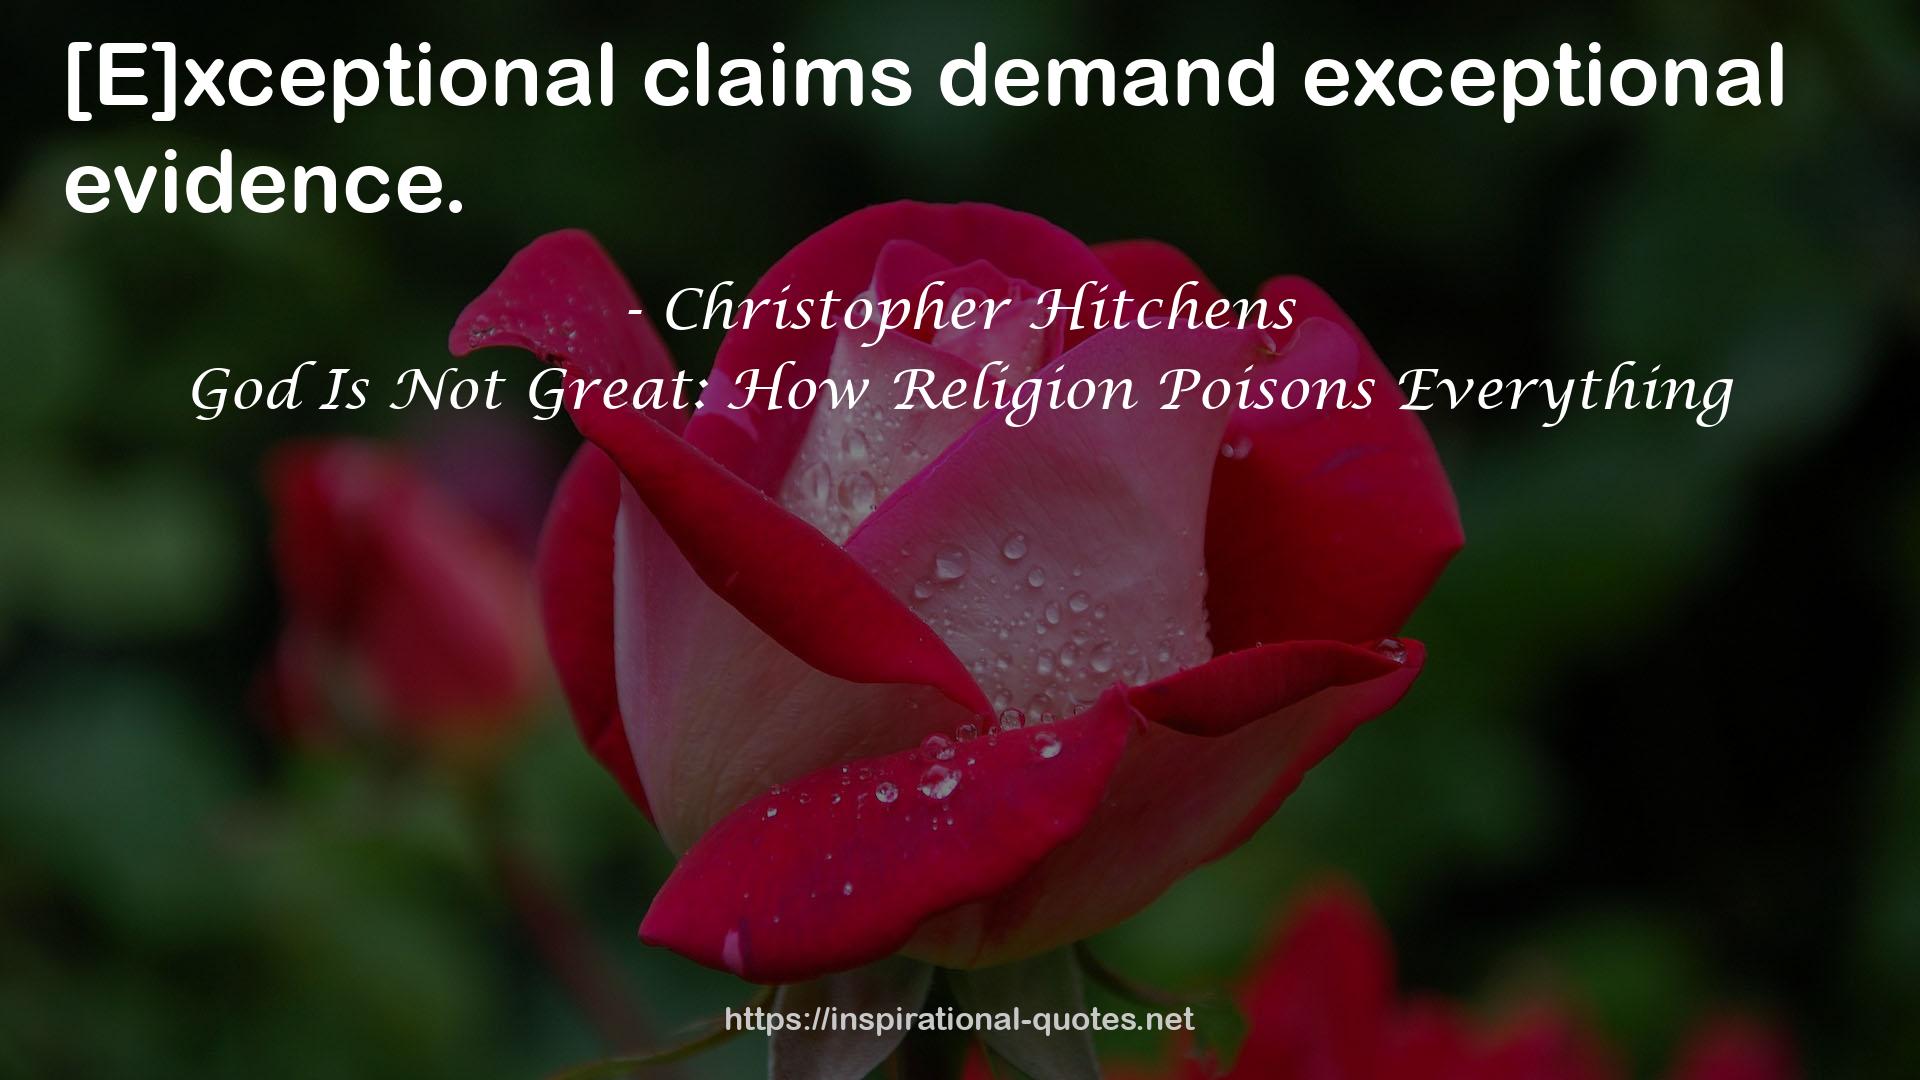 Christopher Hitchens QUOTES